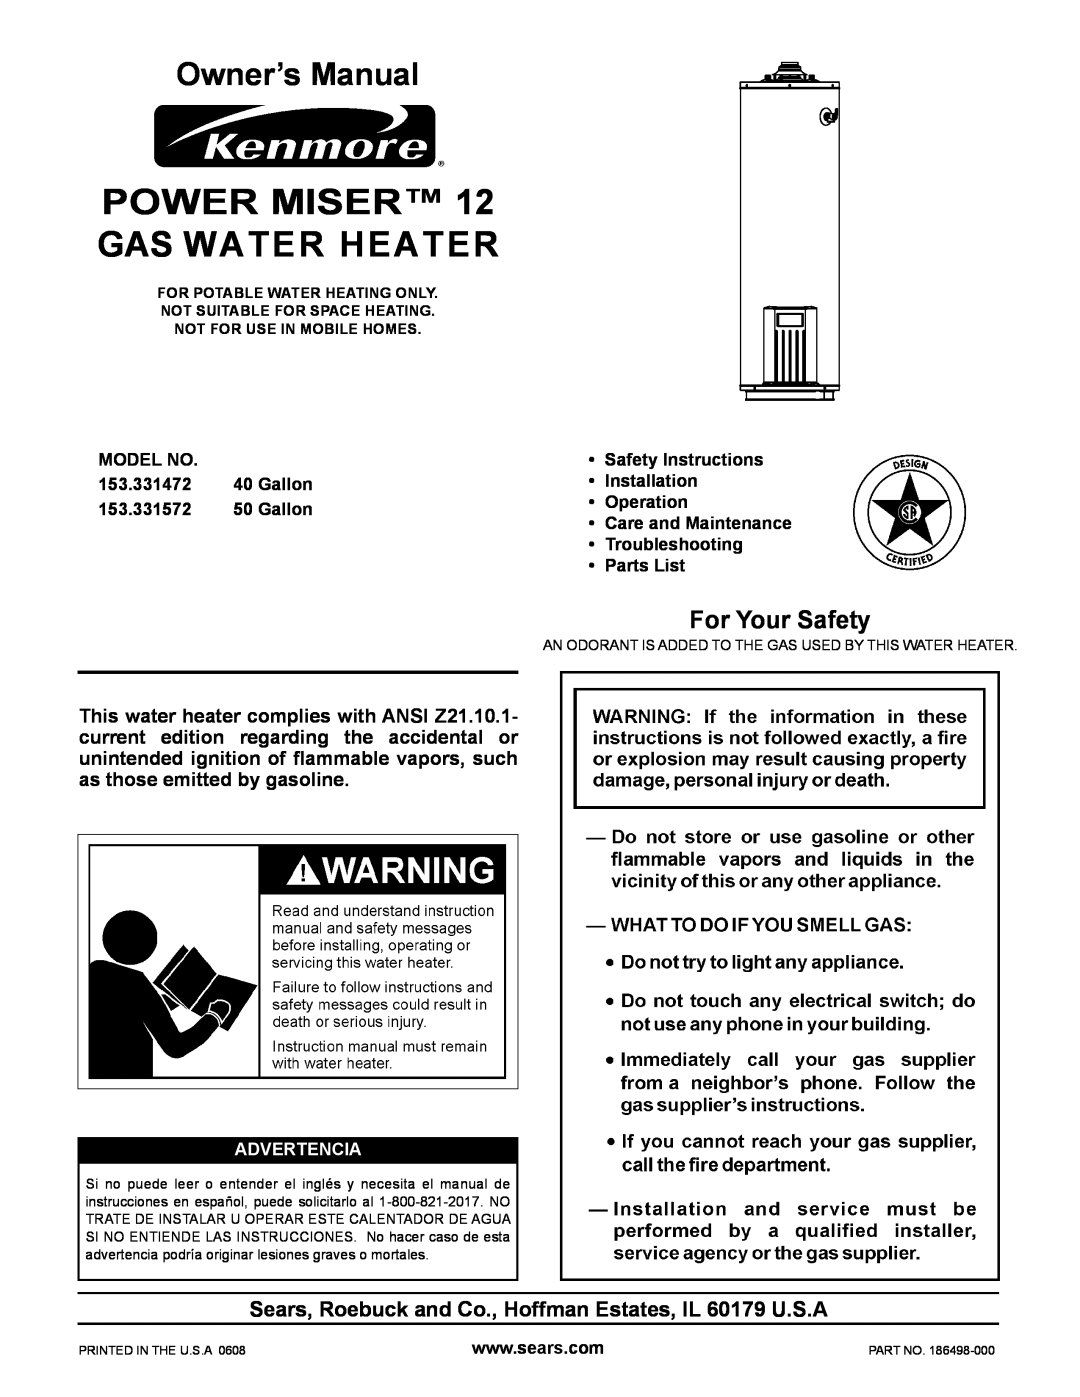 Kenmore 153.331572 owner manual For Your Safety, Power Miser Gas Water Heater, Advertencia 